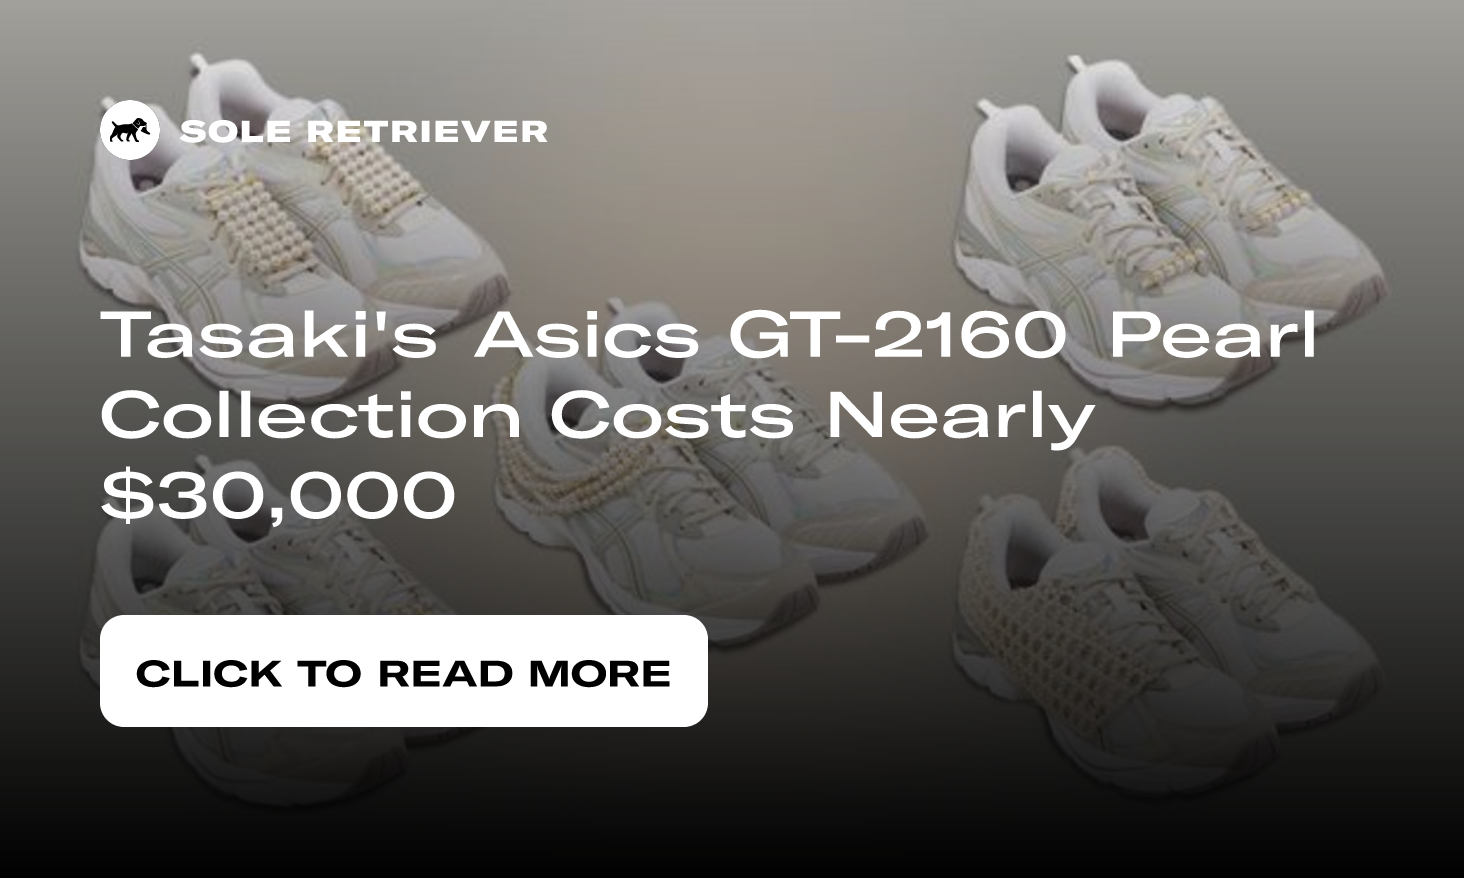 Tasaki's Asics GT-2160 Pearl Collection Costs Nearly $30,000